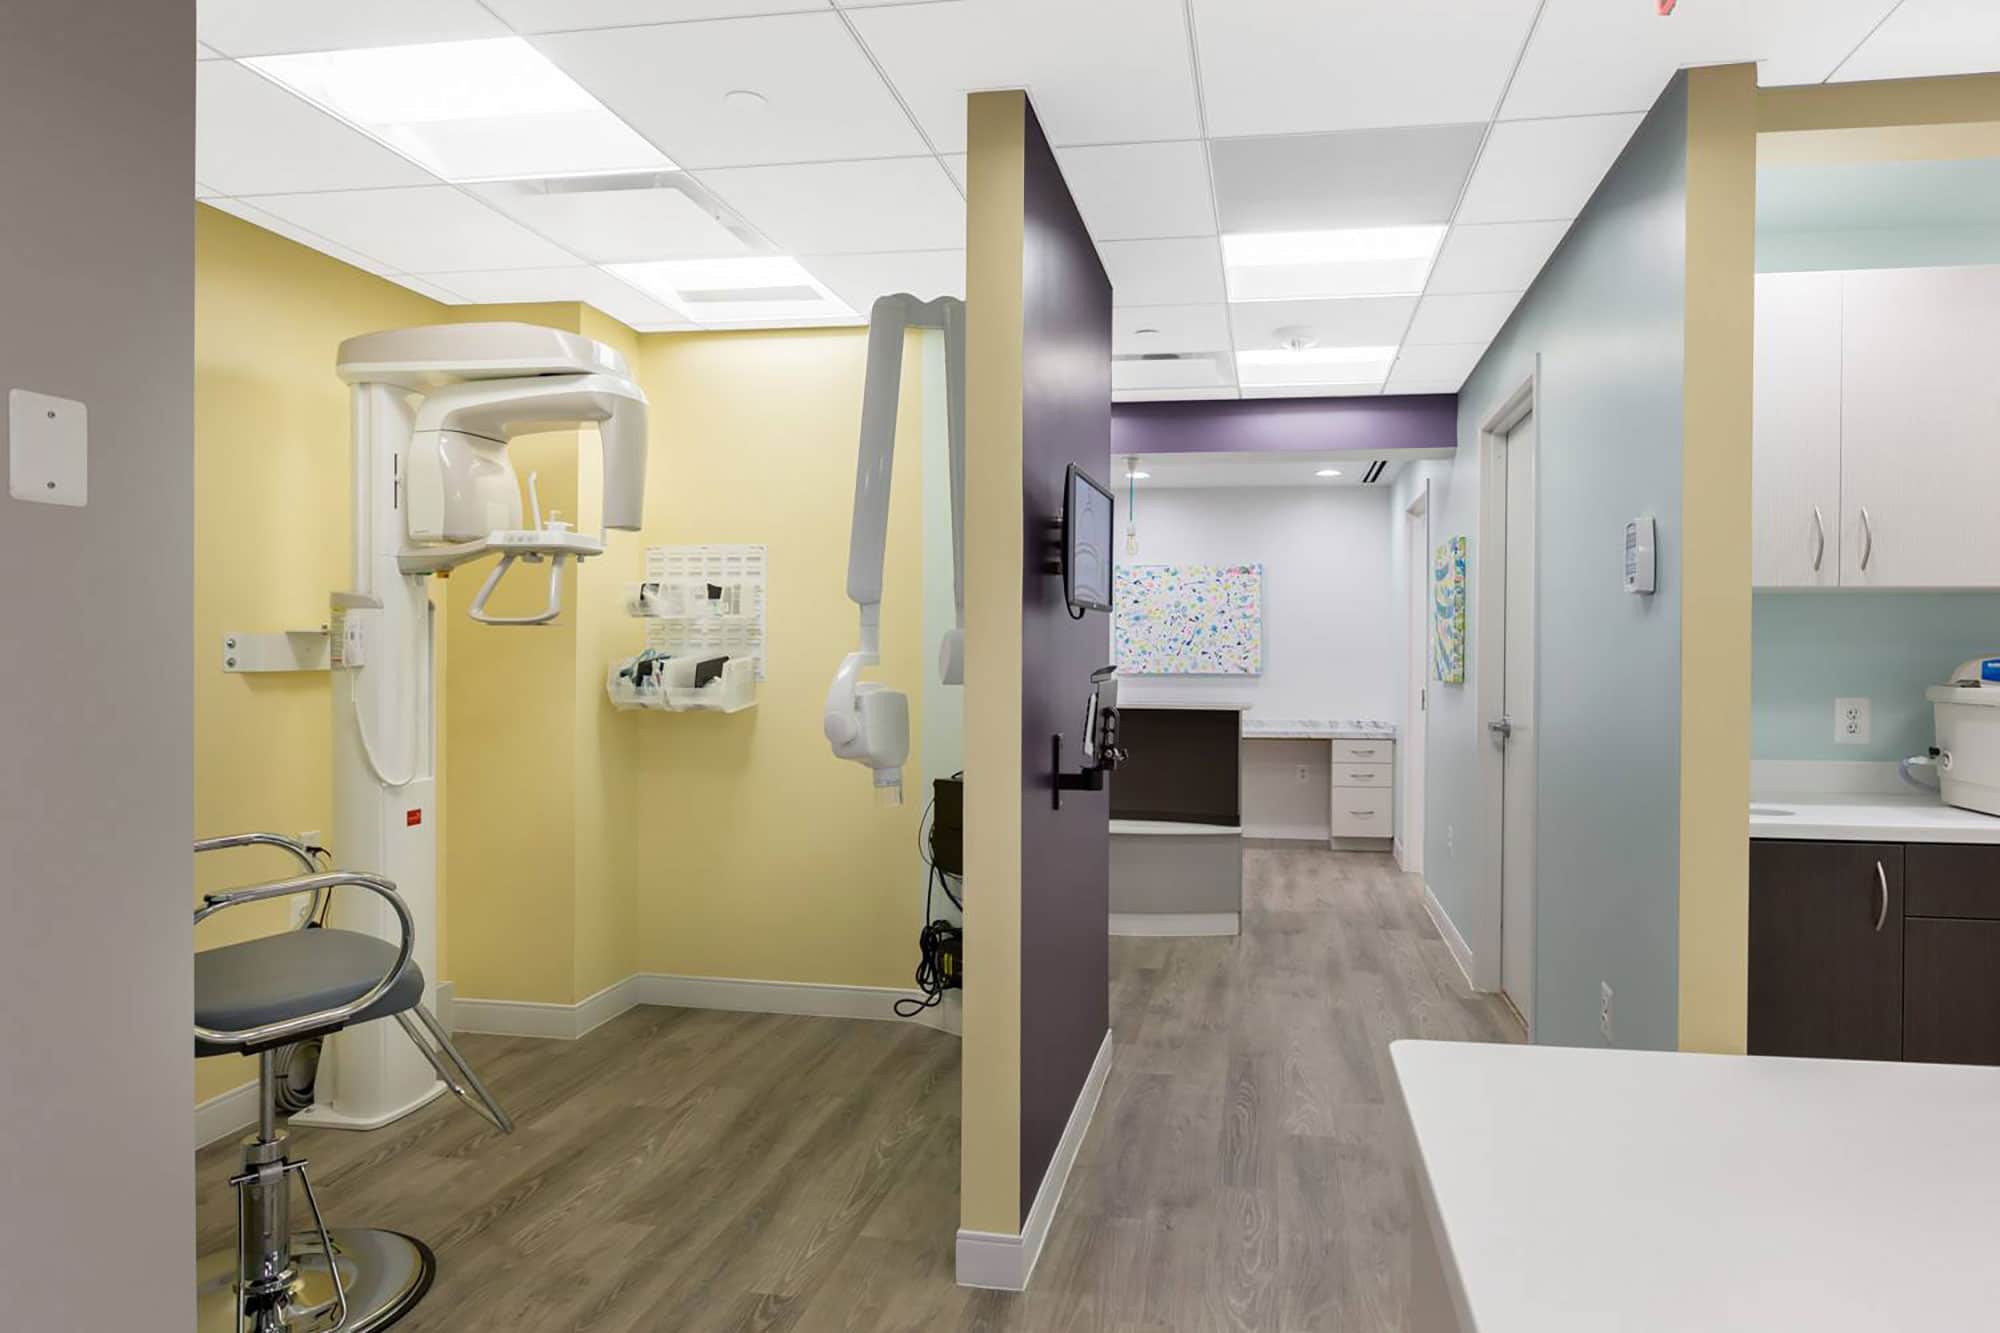 x-ray area in dental office with wood floors and yellow walls